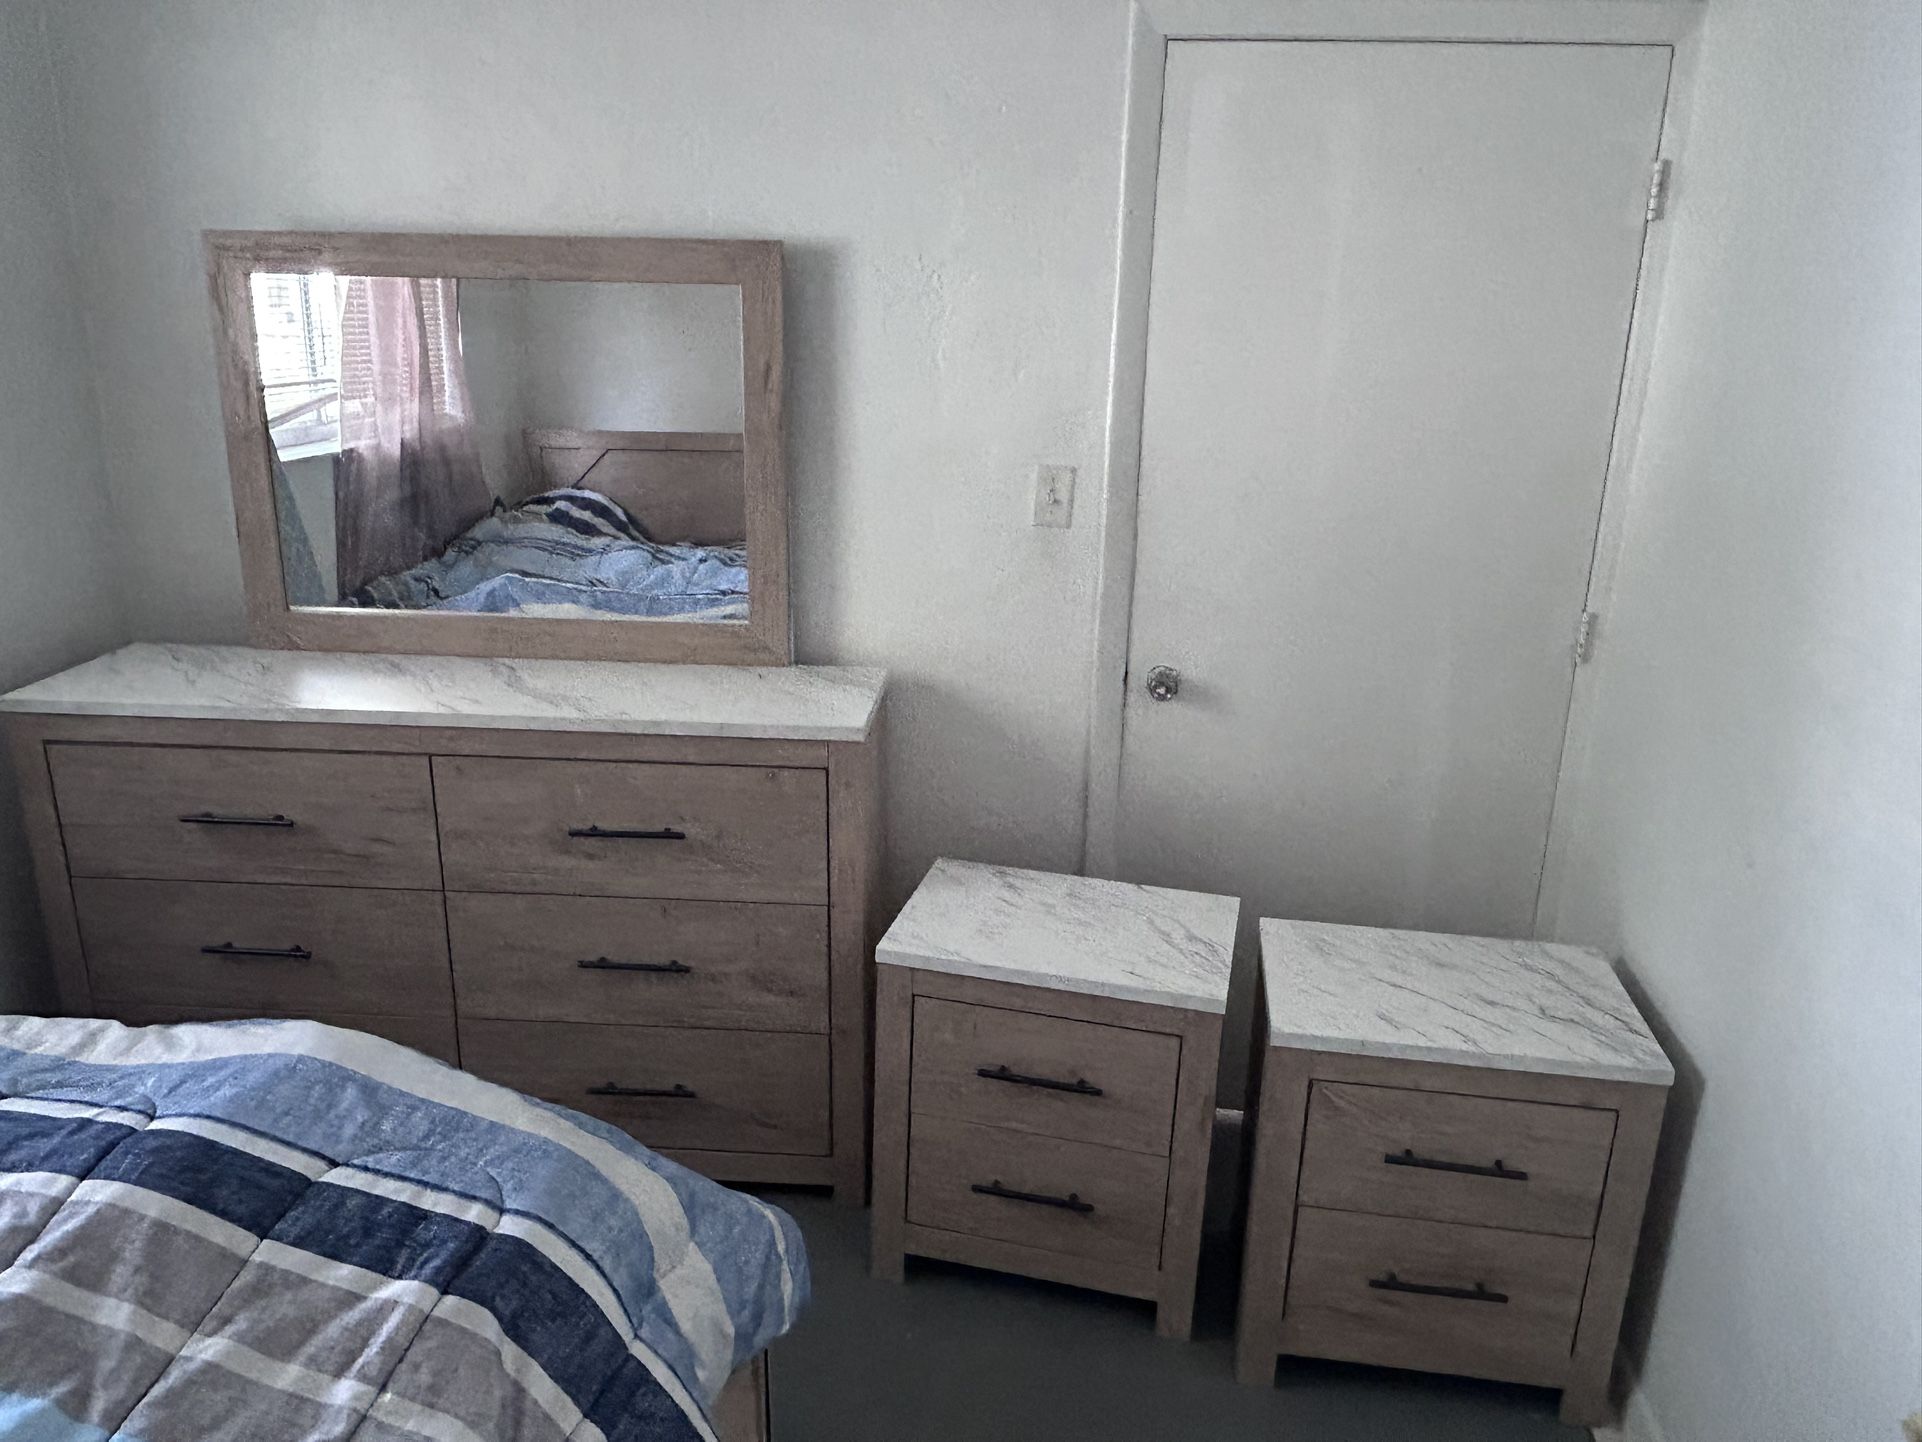 2 NightStand and a Dresser Set 